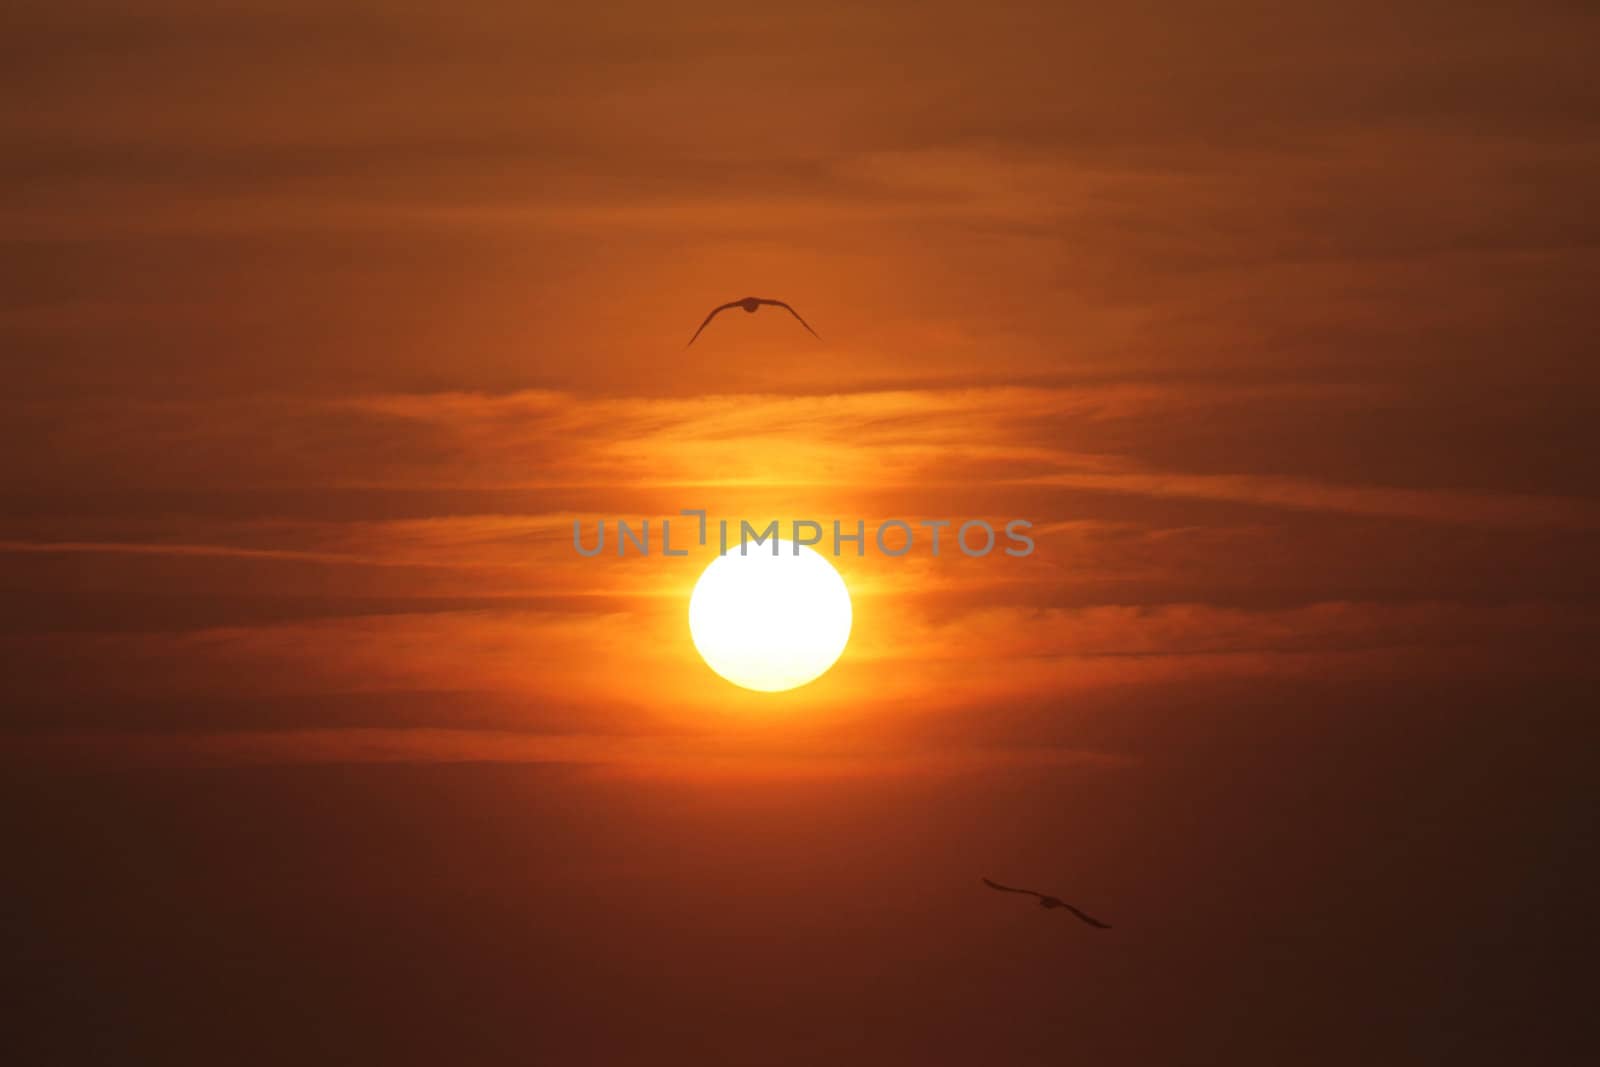 Seagulls flying around in the sunset by atlas